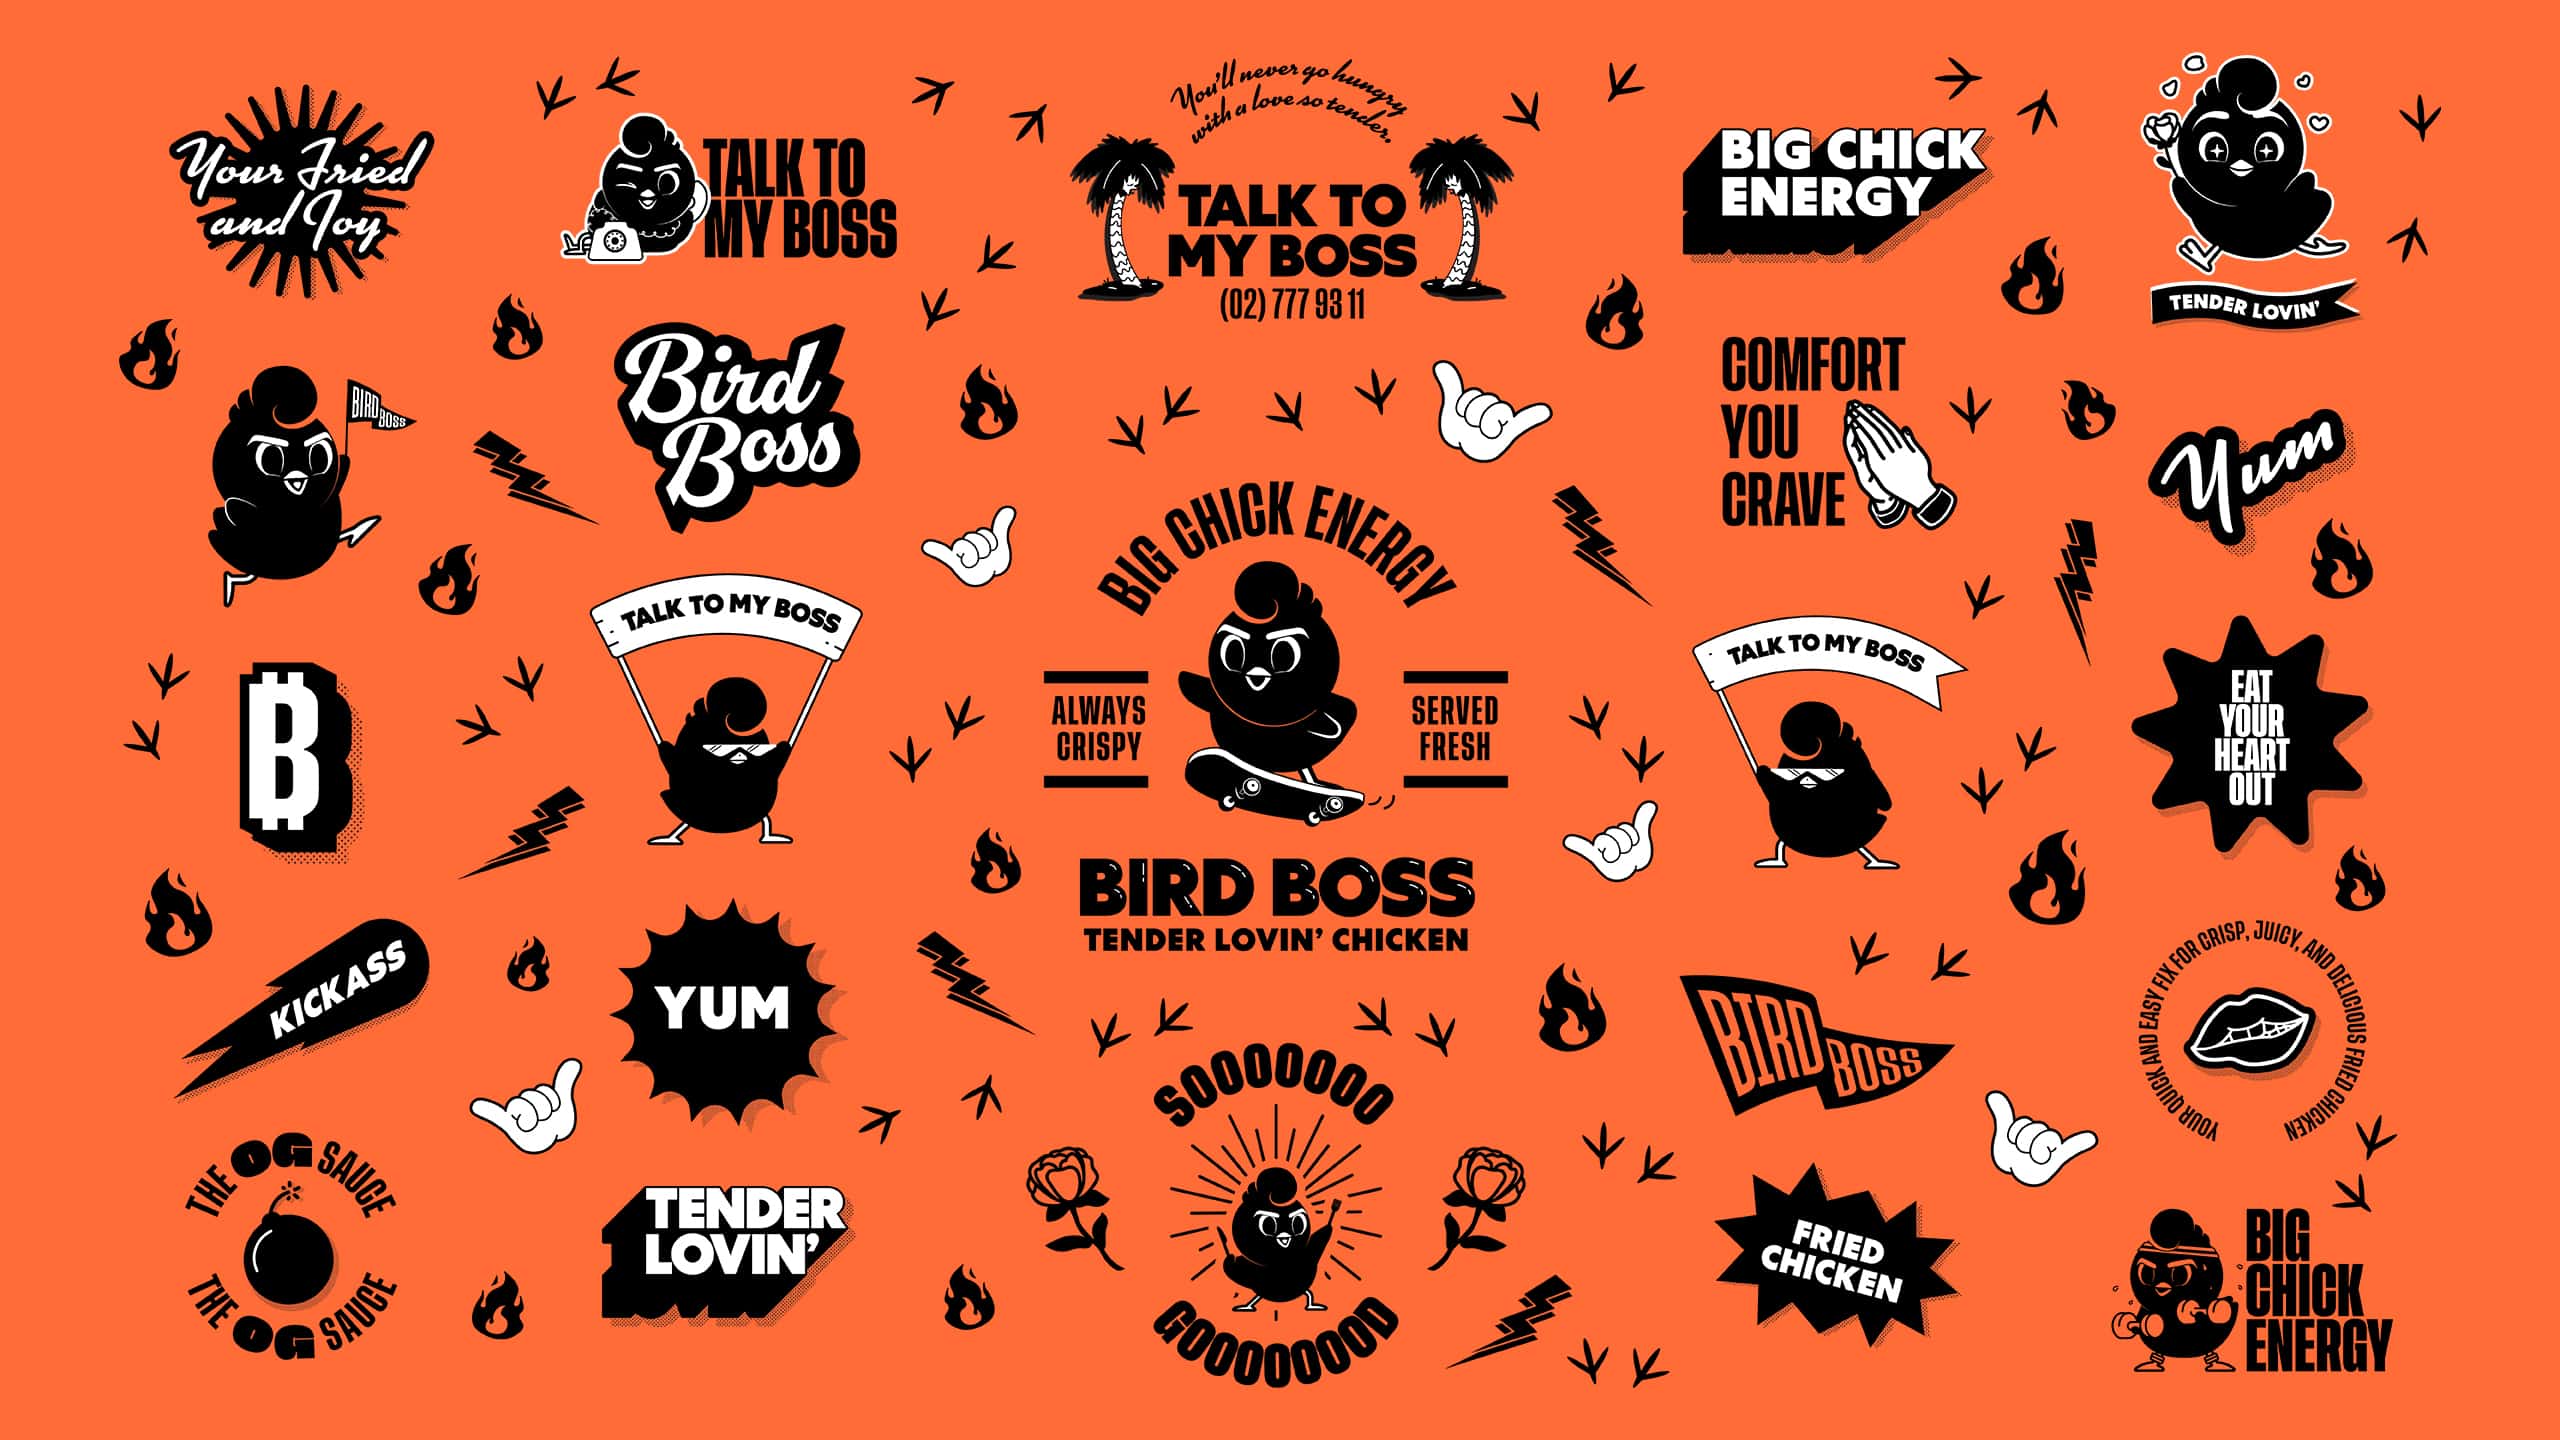 Fun and witty illustrations and icons for casual chicken restaurant Bird Boss